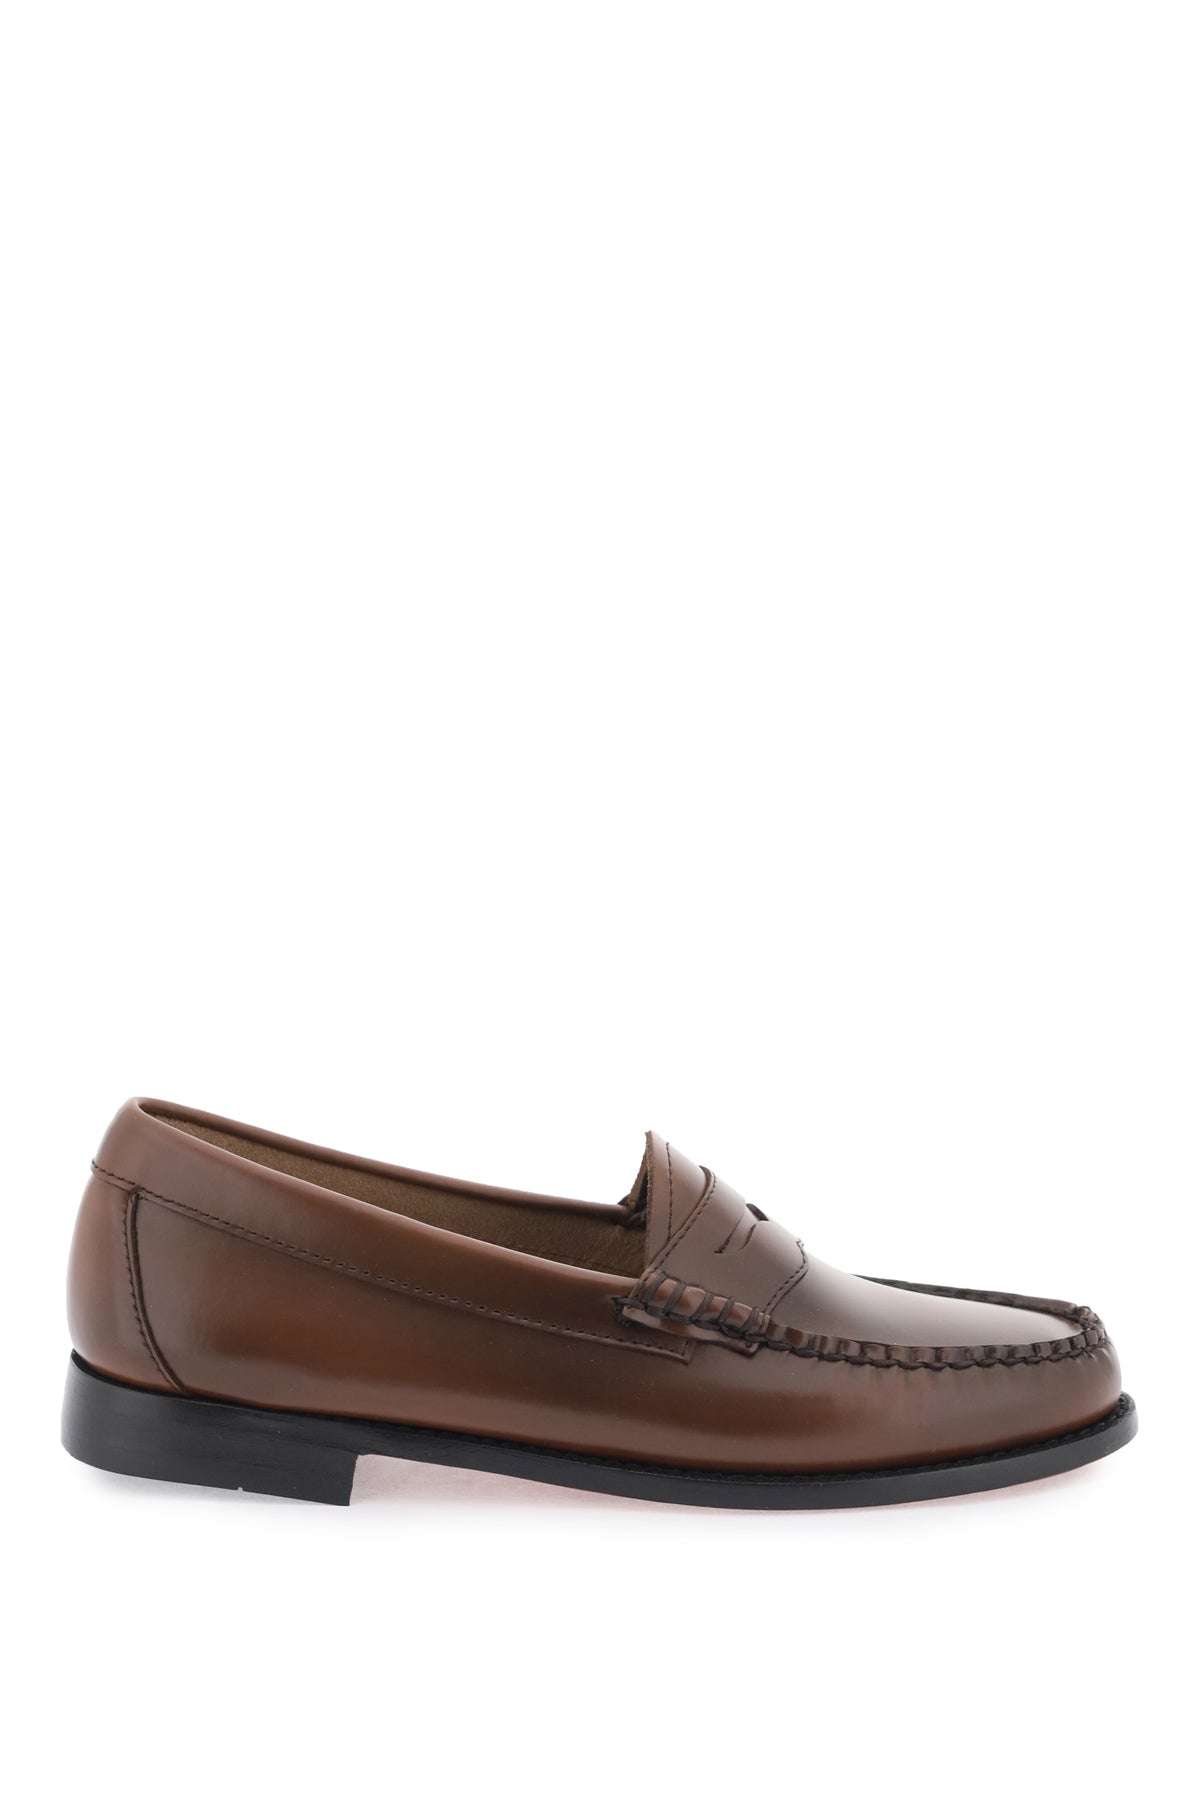 BROWN G.H. BASS & CO. 'WEEJUNS' PENNY LOAFERS (BA41010) | LOZURI